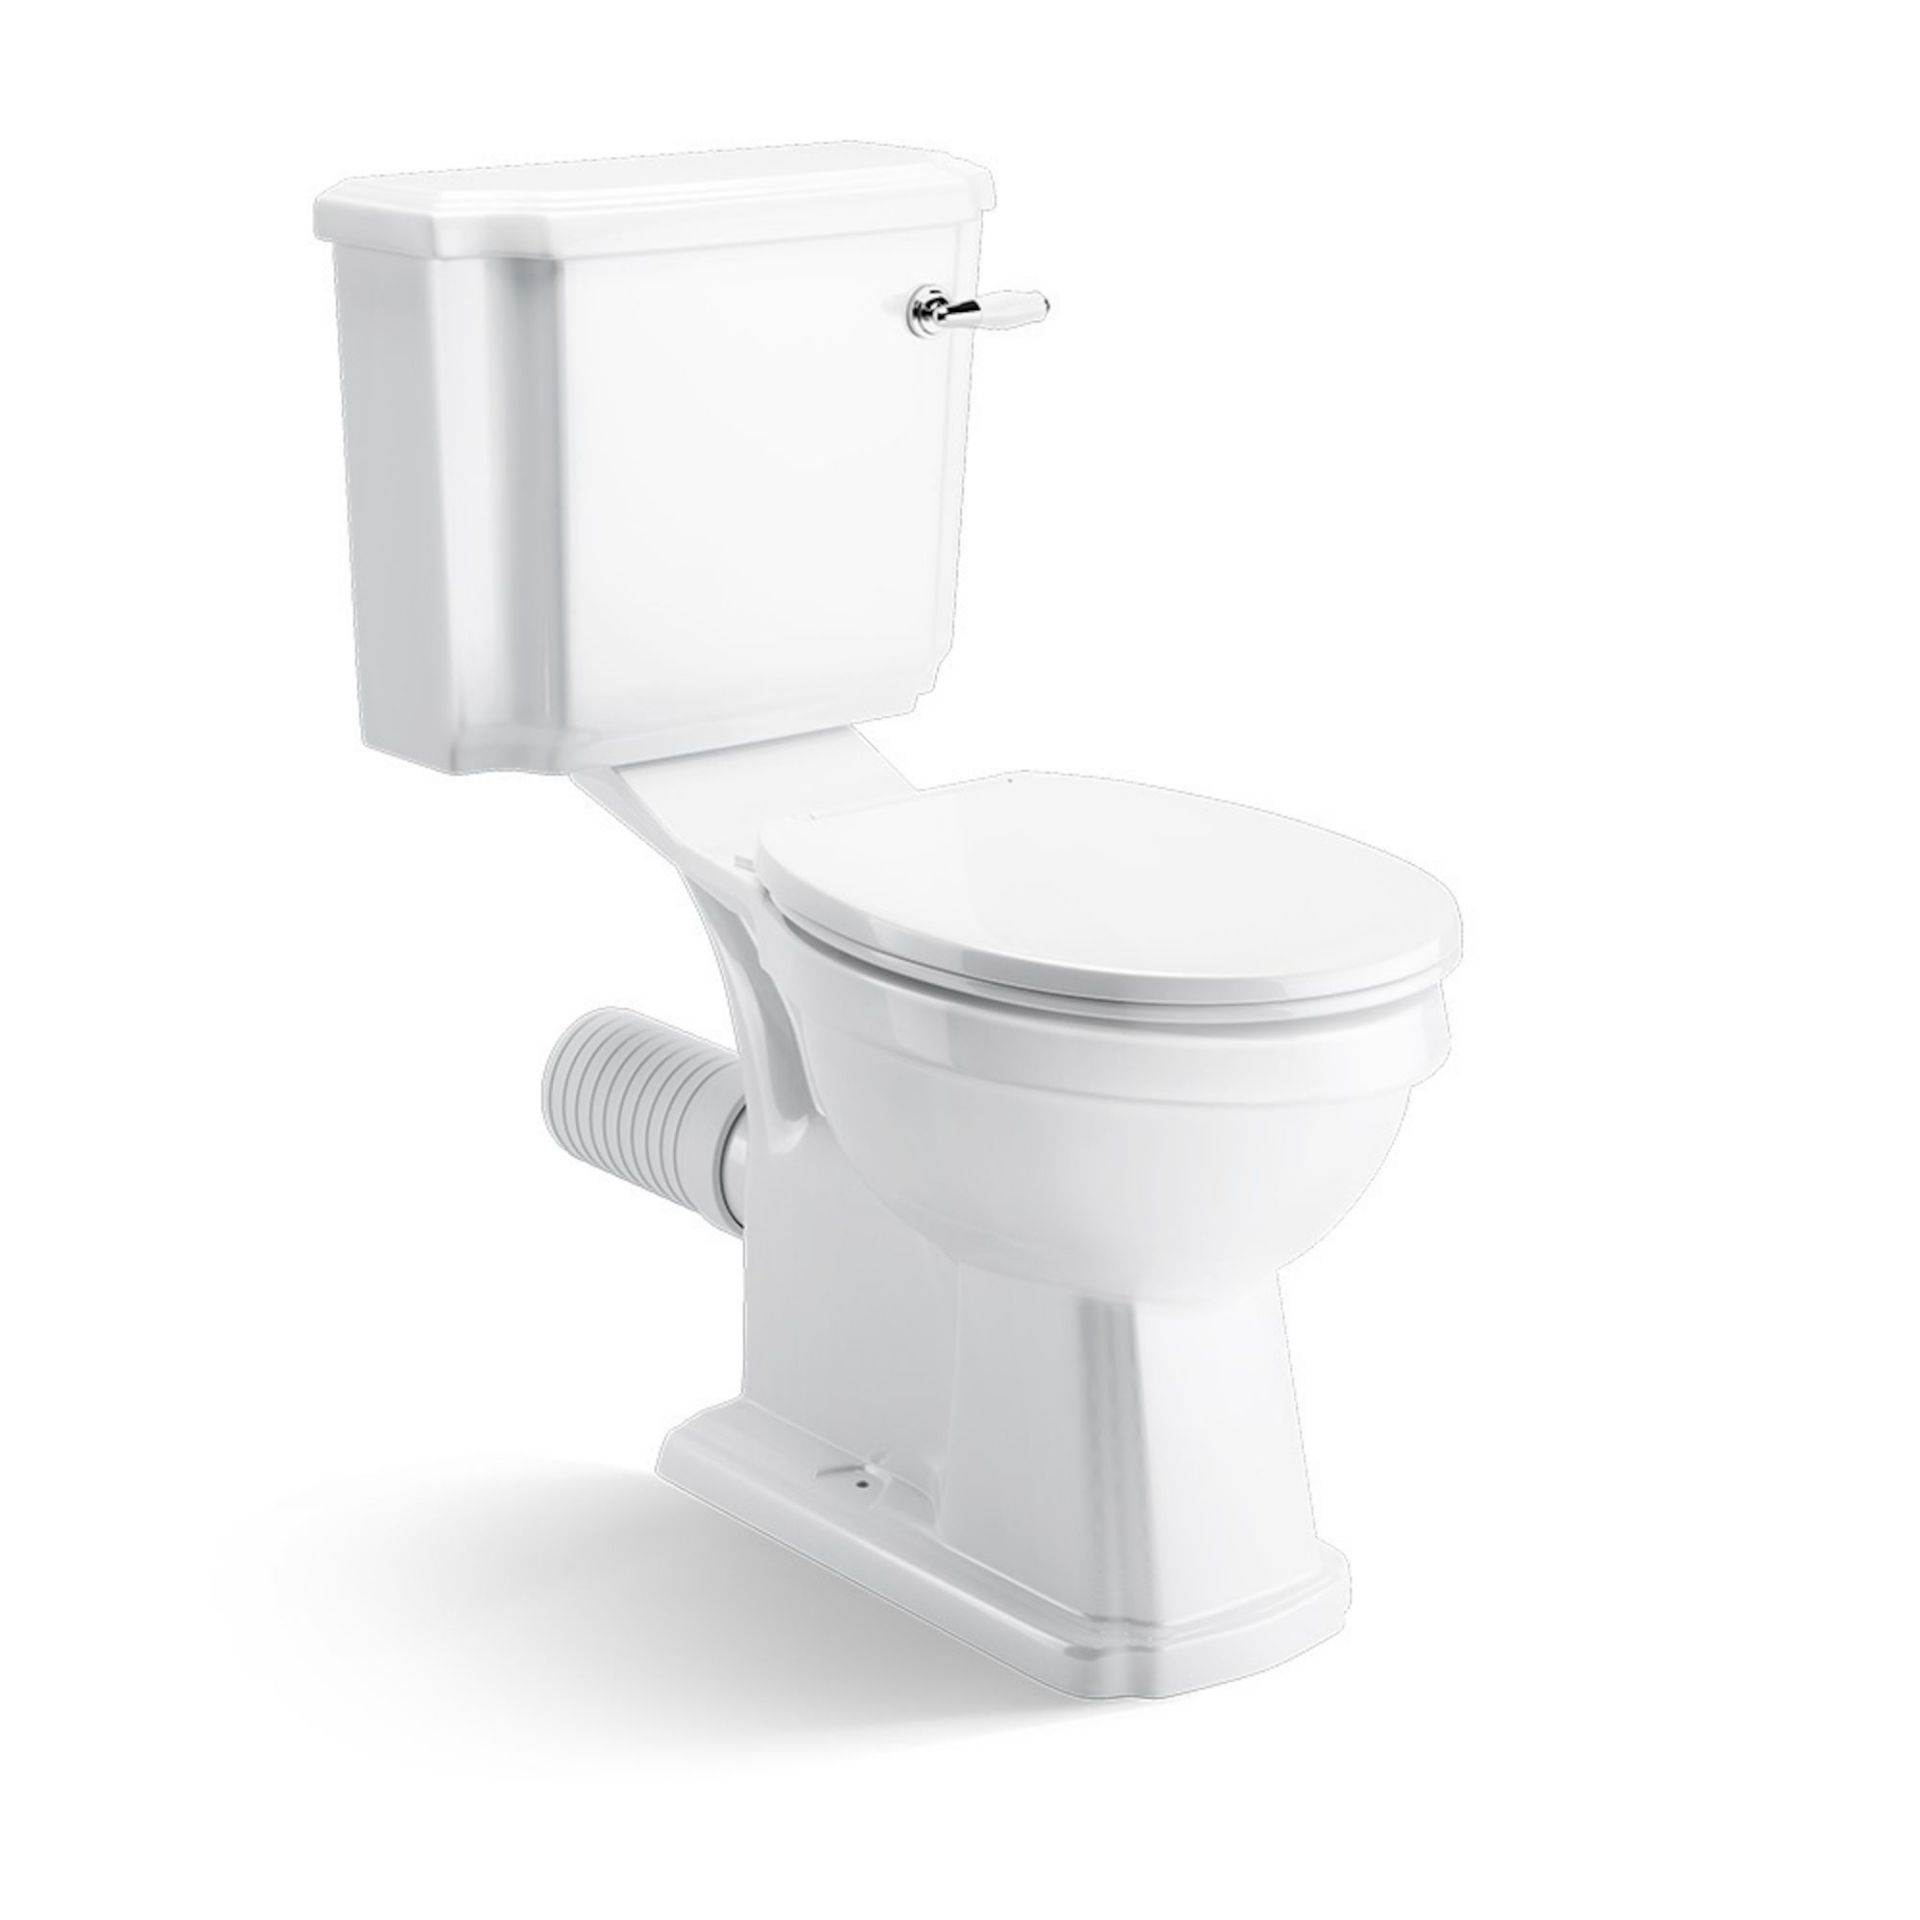 NEW & BOXED Cambridge Traditional Close Coupled Toilet & Cistern - White Seat. CCG629PAN.Traditional - Image 2 of 2